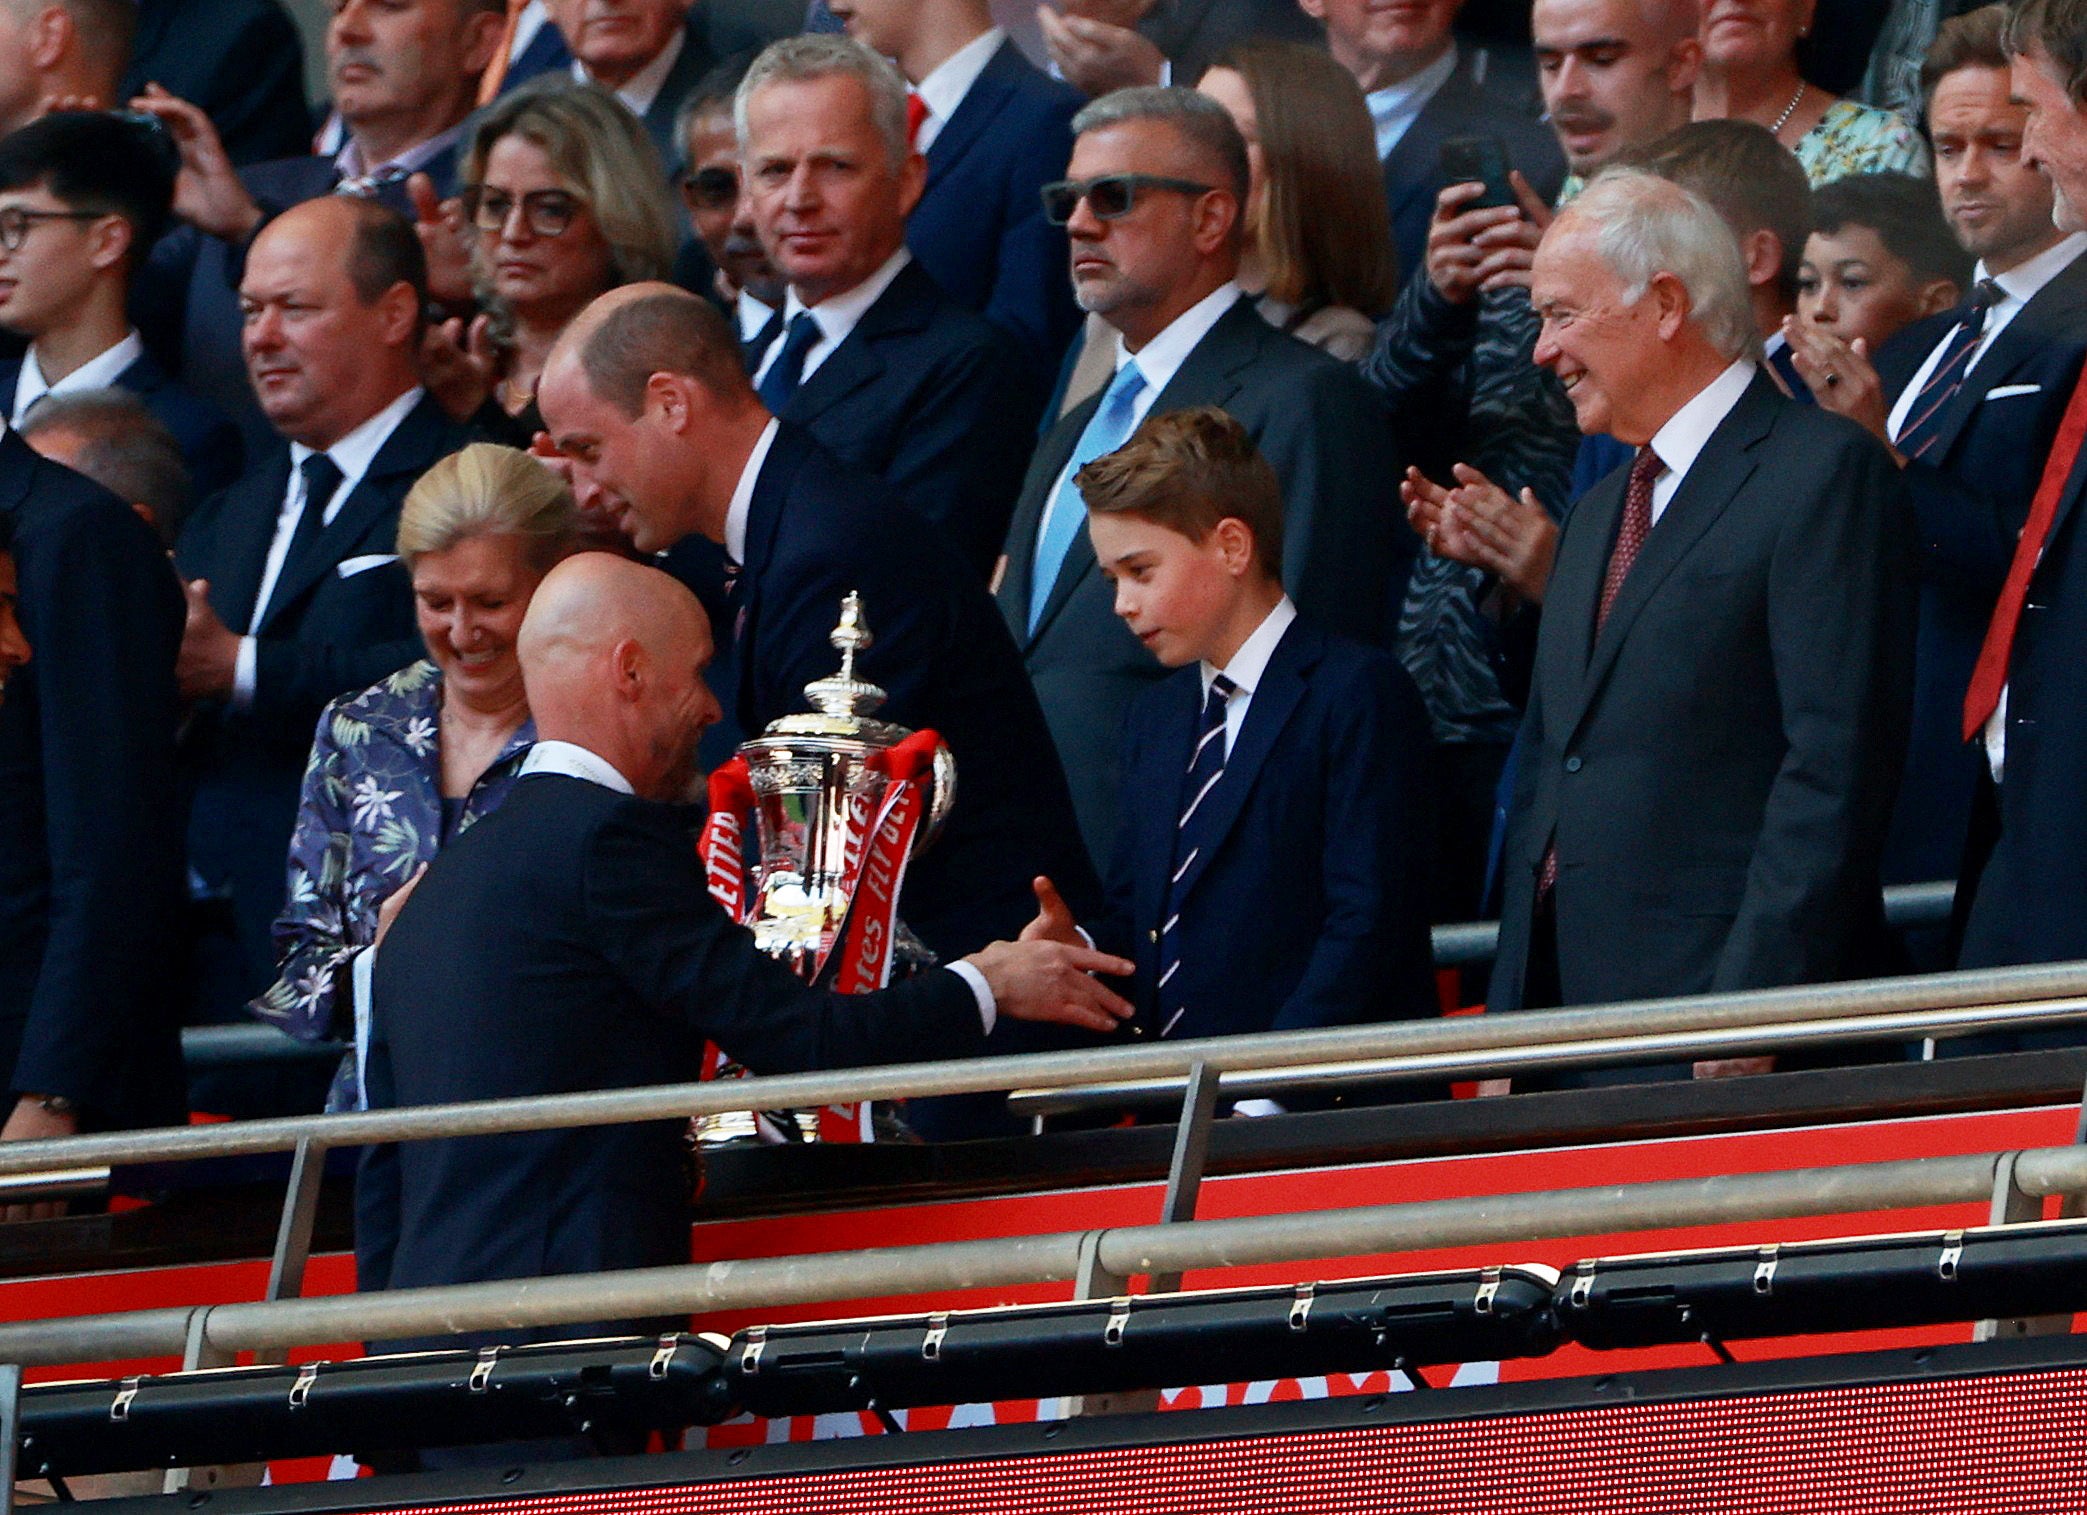 Erik ten Hag shakes hands with Prince George after winning the FA Cup